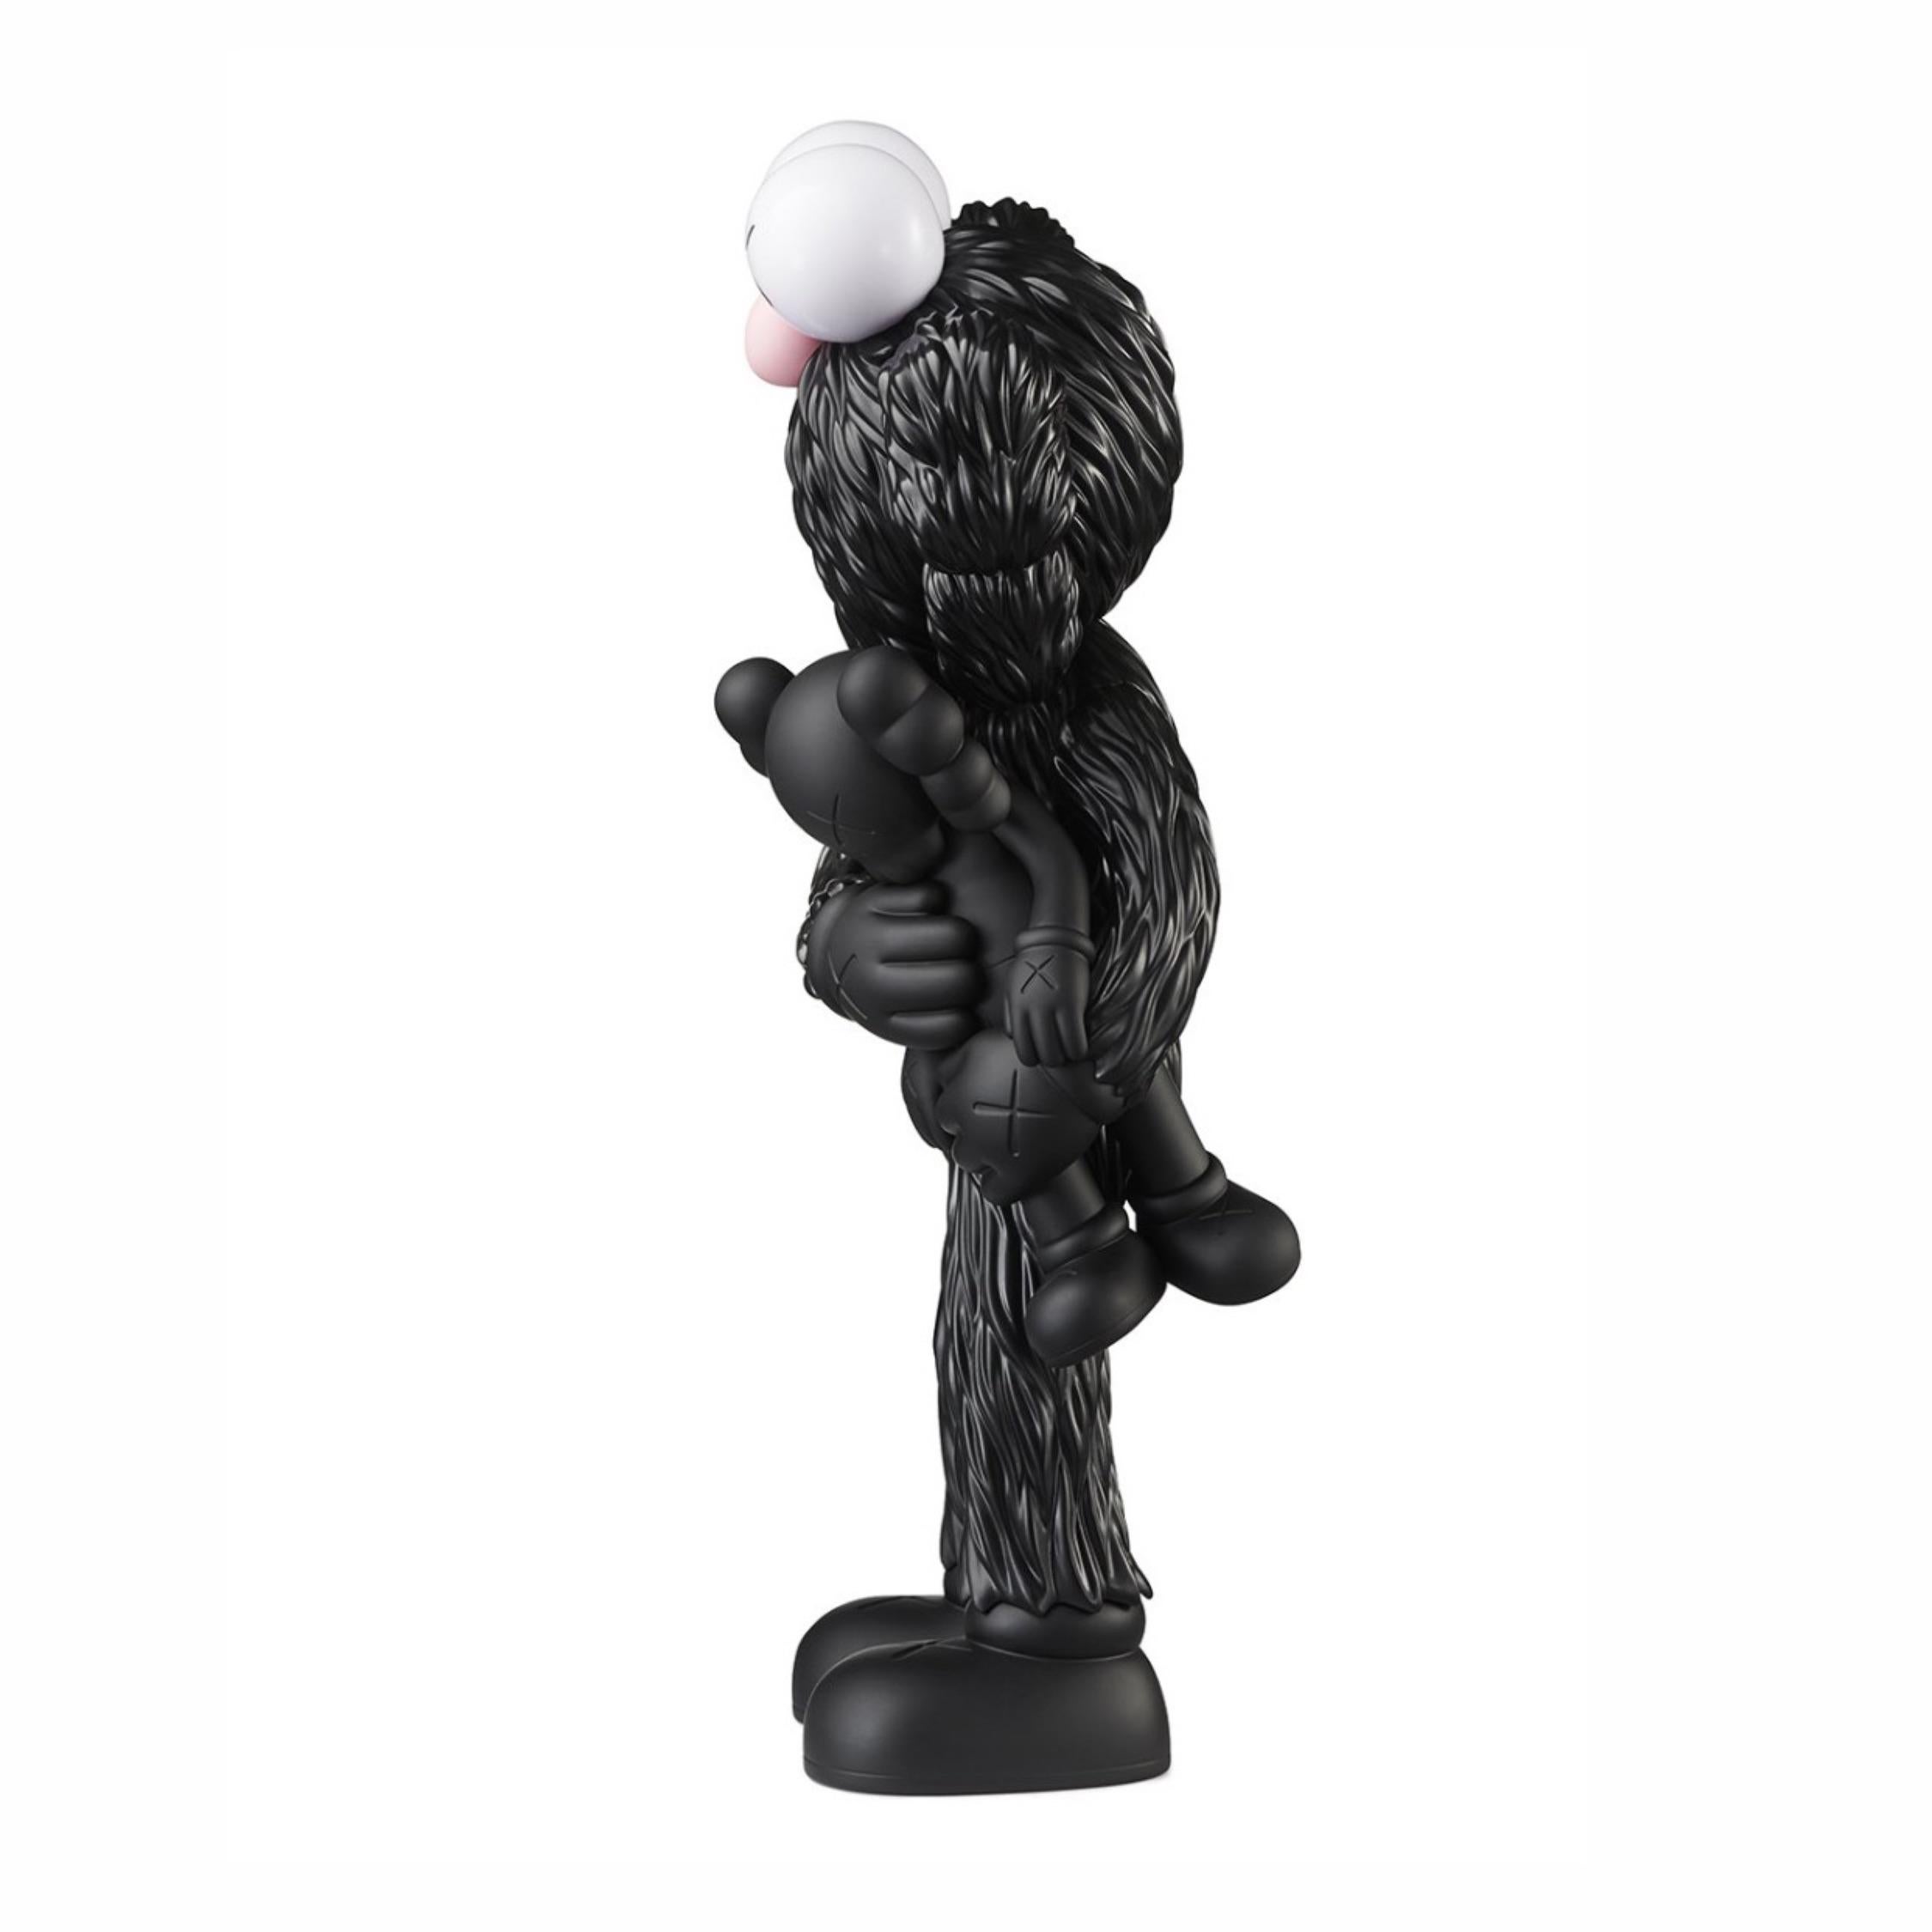 This is a brand new piece in perfect condition. 

Several months after releasing the KAWS Share Figure in February, the artist released his long anticipated KAWS Take Figure. The figure, which features a blue BFF holding a brown Companion, is the